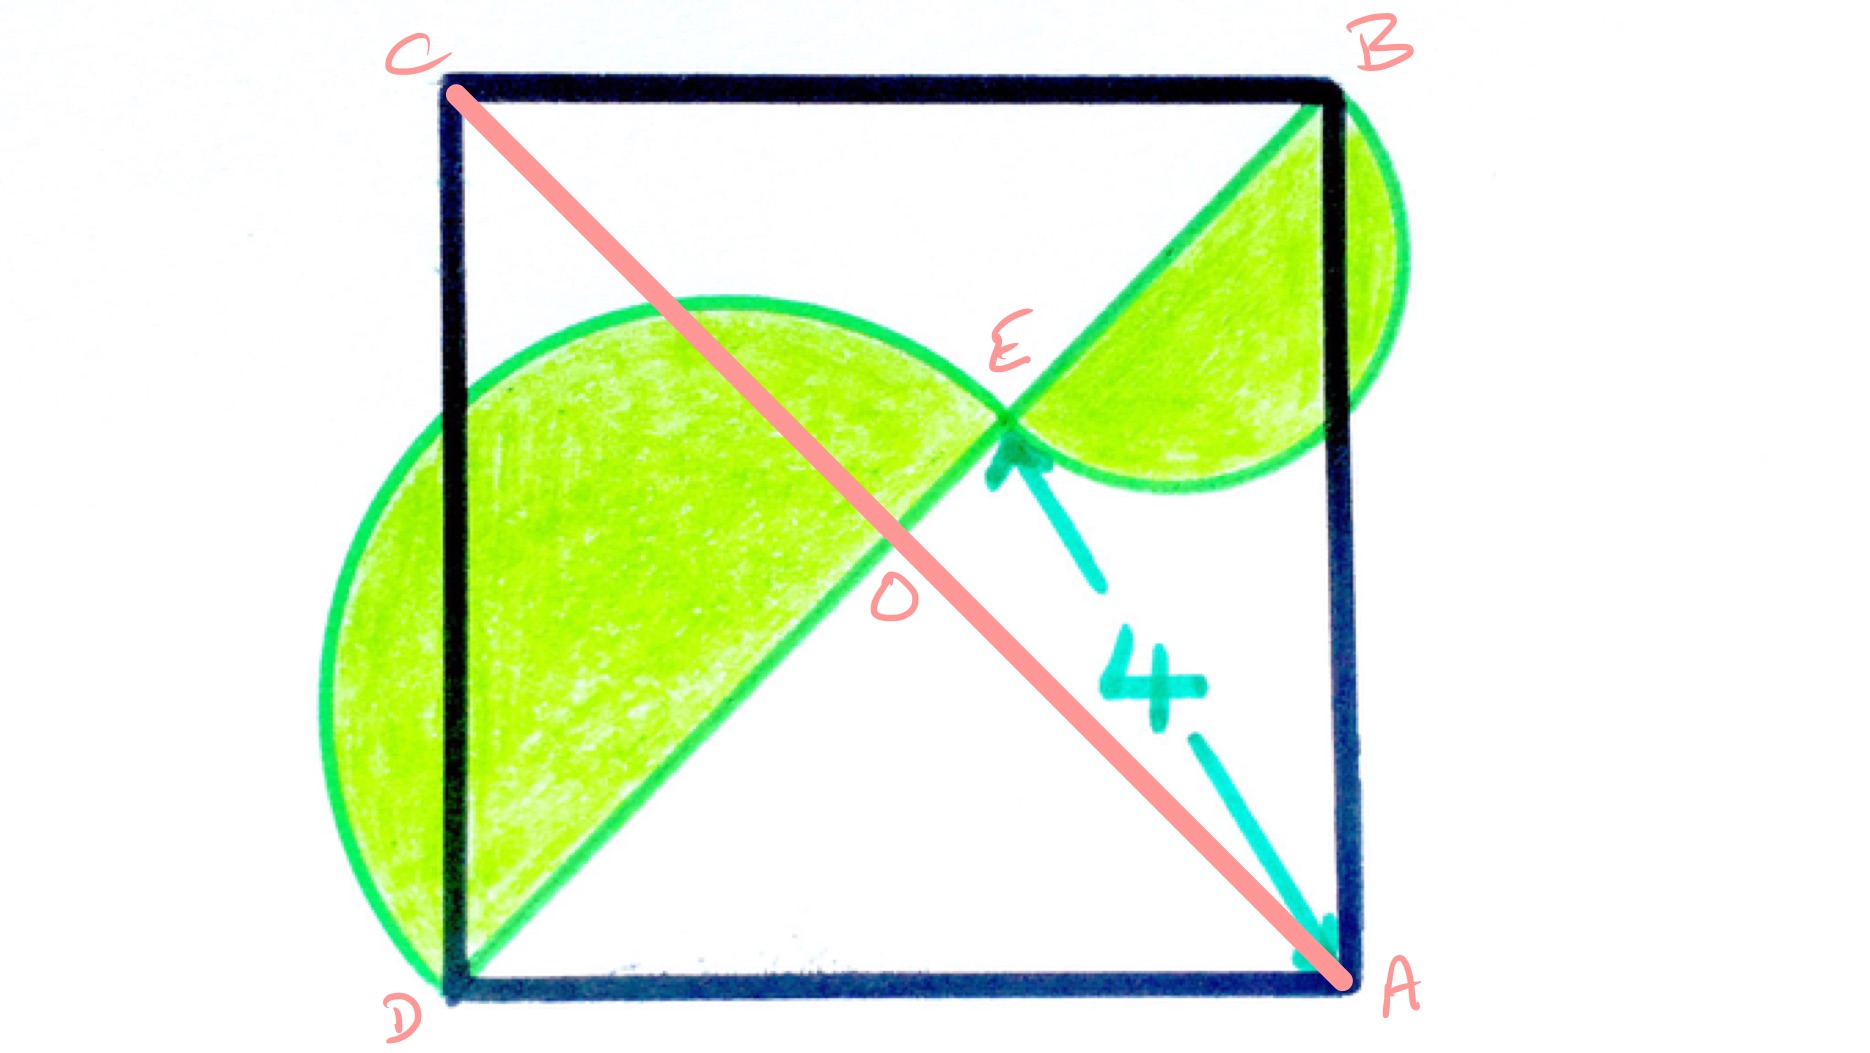 Two semi-circles diagonally across a square labelled